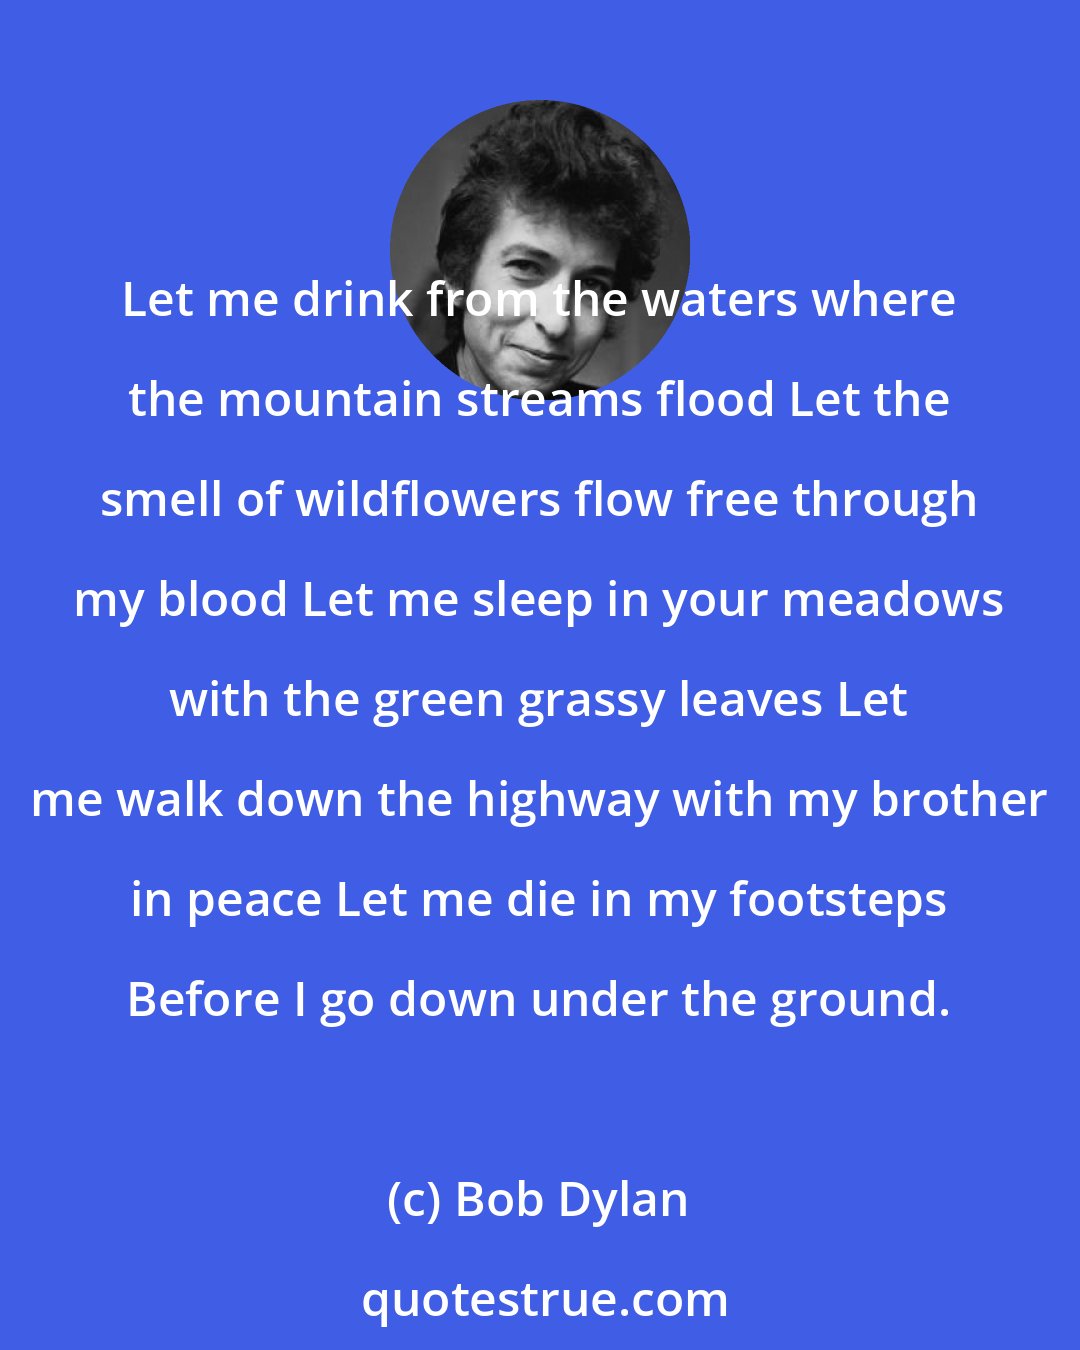 Bob Dylan: Let me drink from the waters where the mountain streams flood Let the smell of wildflowers flow free through my blood Let me sleep in your meadows with the green grassy leaves Let me walk down the highway with my brother in peace Let me die in my footsteps Before I go down under the ground.